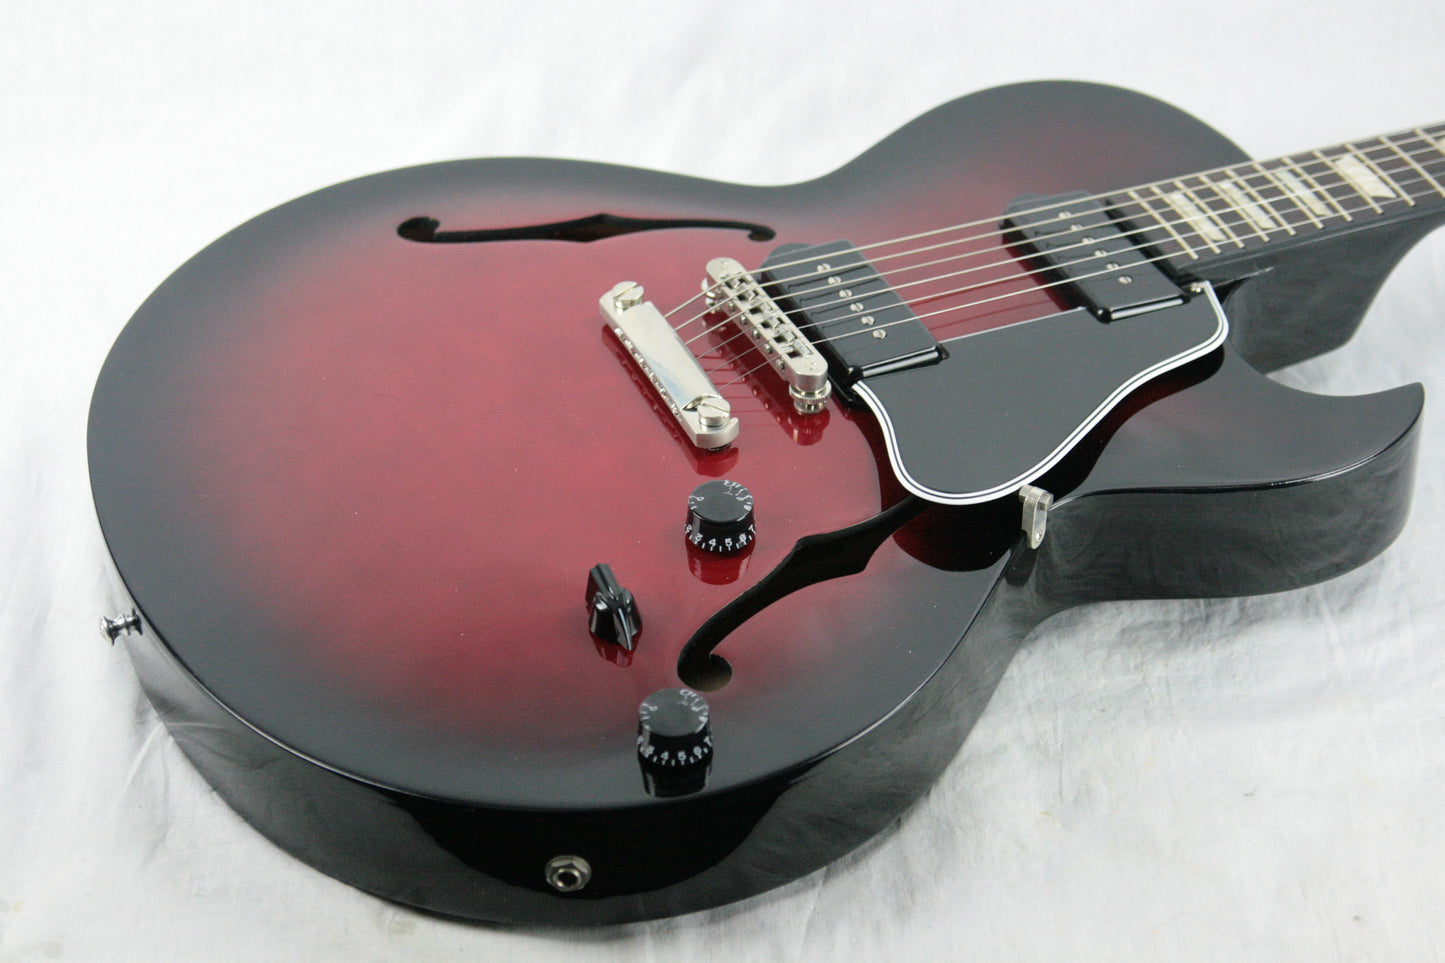 NOS 2014 Gibson ES-137 Billie Joe Armstrong Black Cherry! Limited Edition